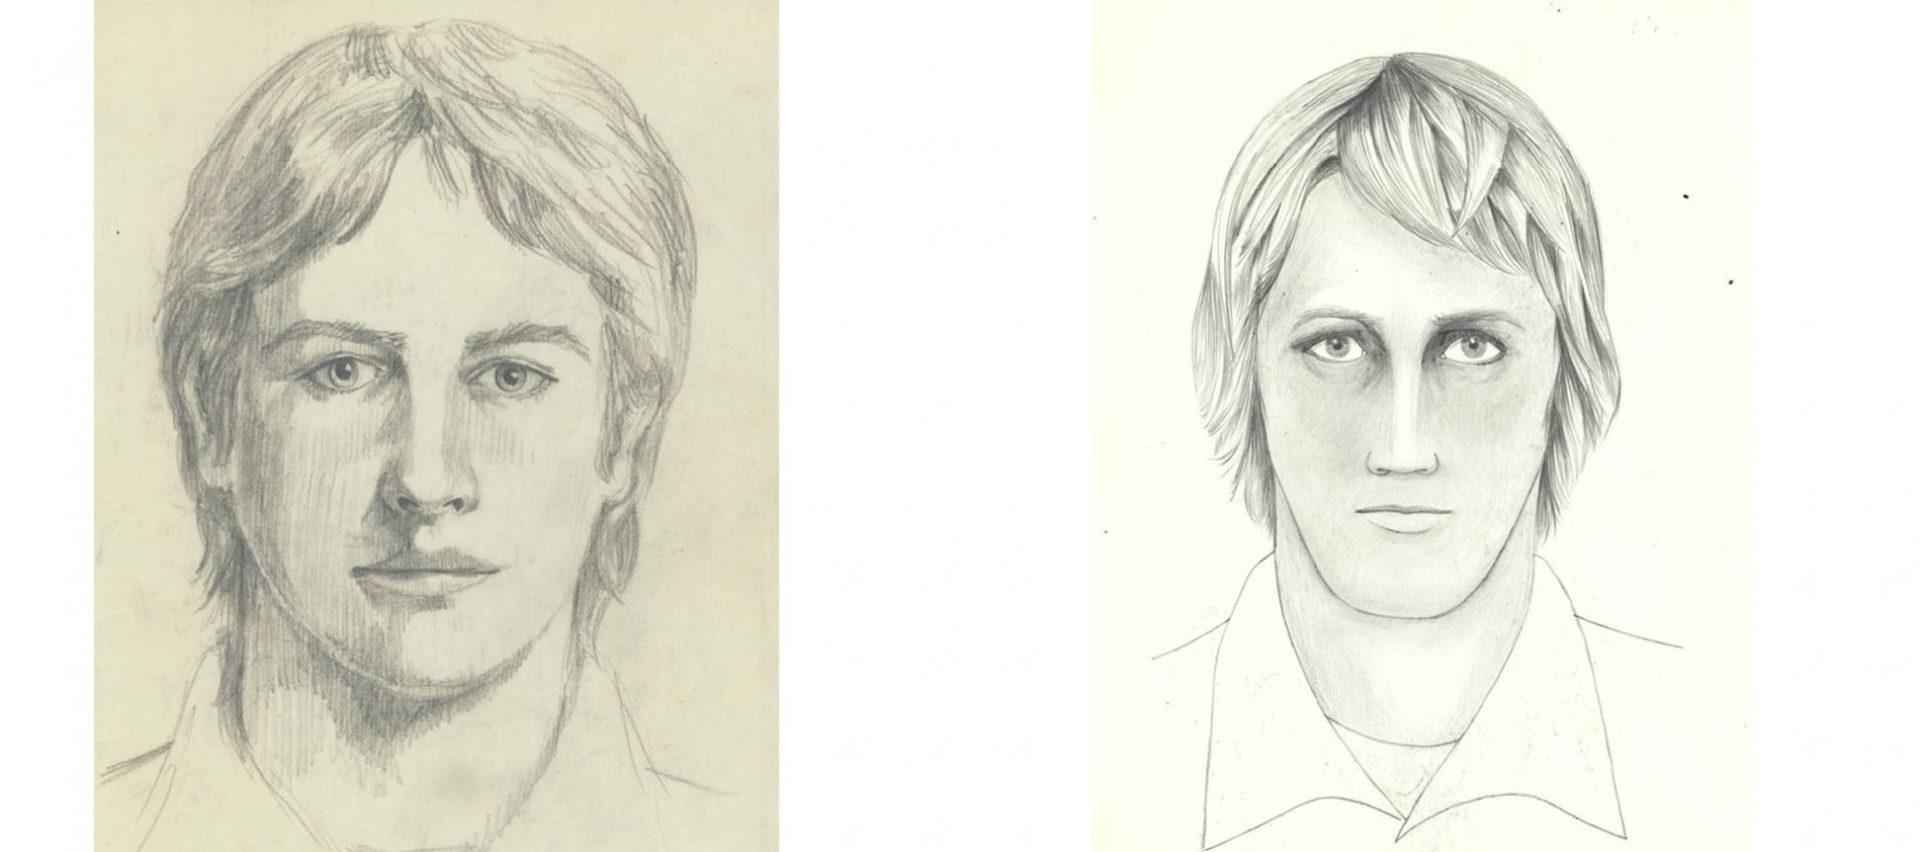 Images from a wanted poster of the East Area Rapist/Golden State Killer. (FBI)